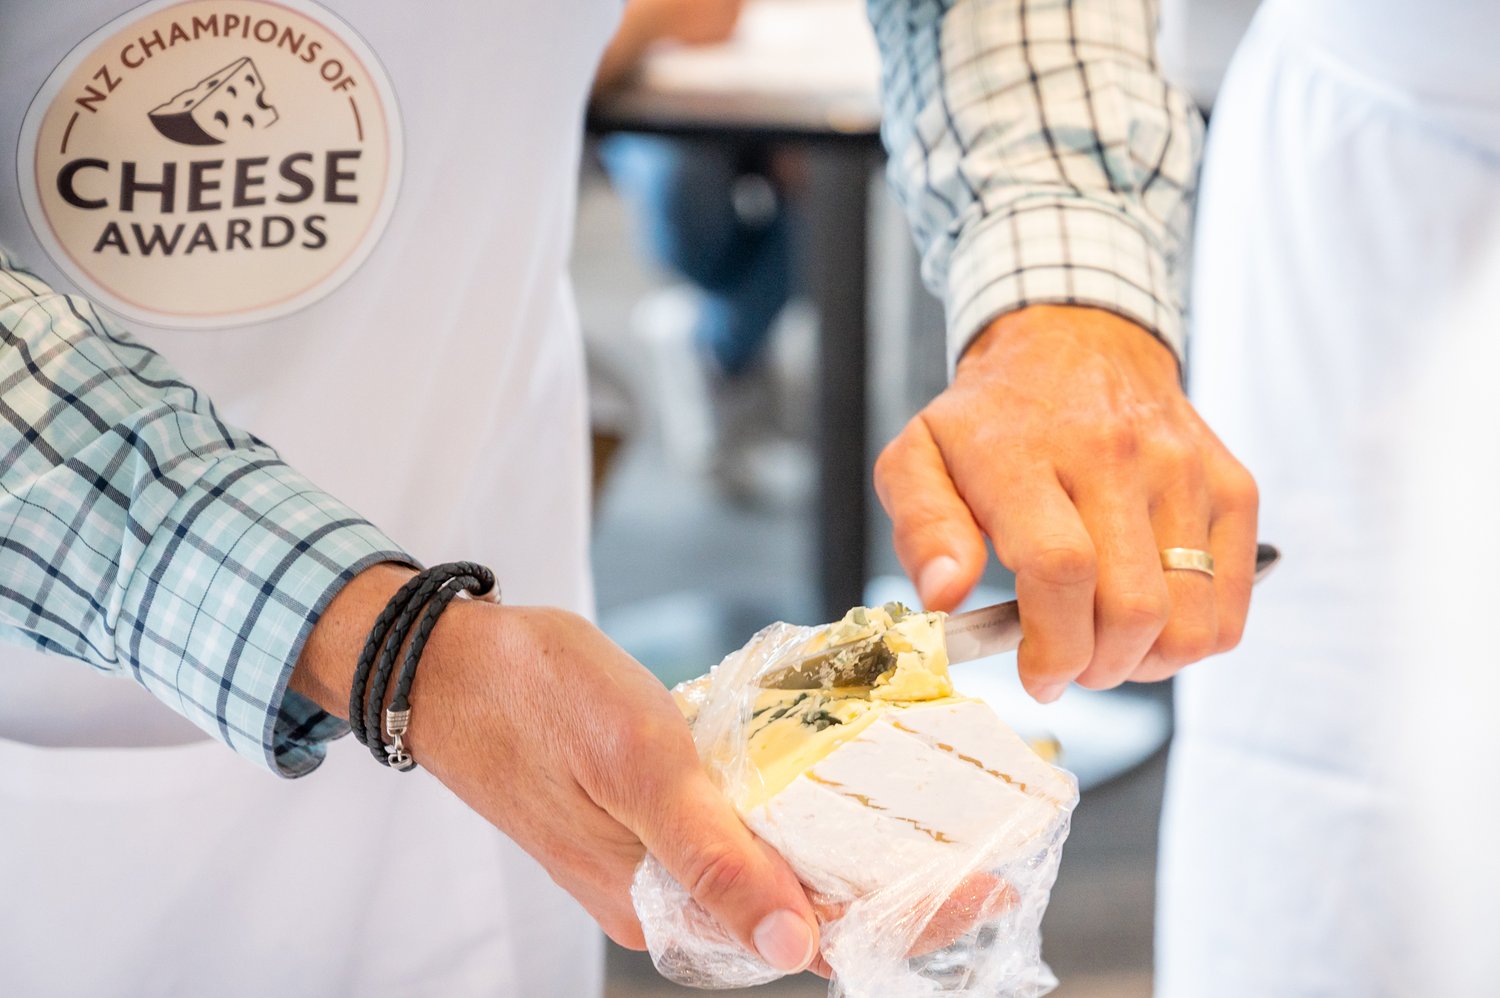 Top cheeses named in New Zealand Champions of Cheese Awards